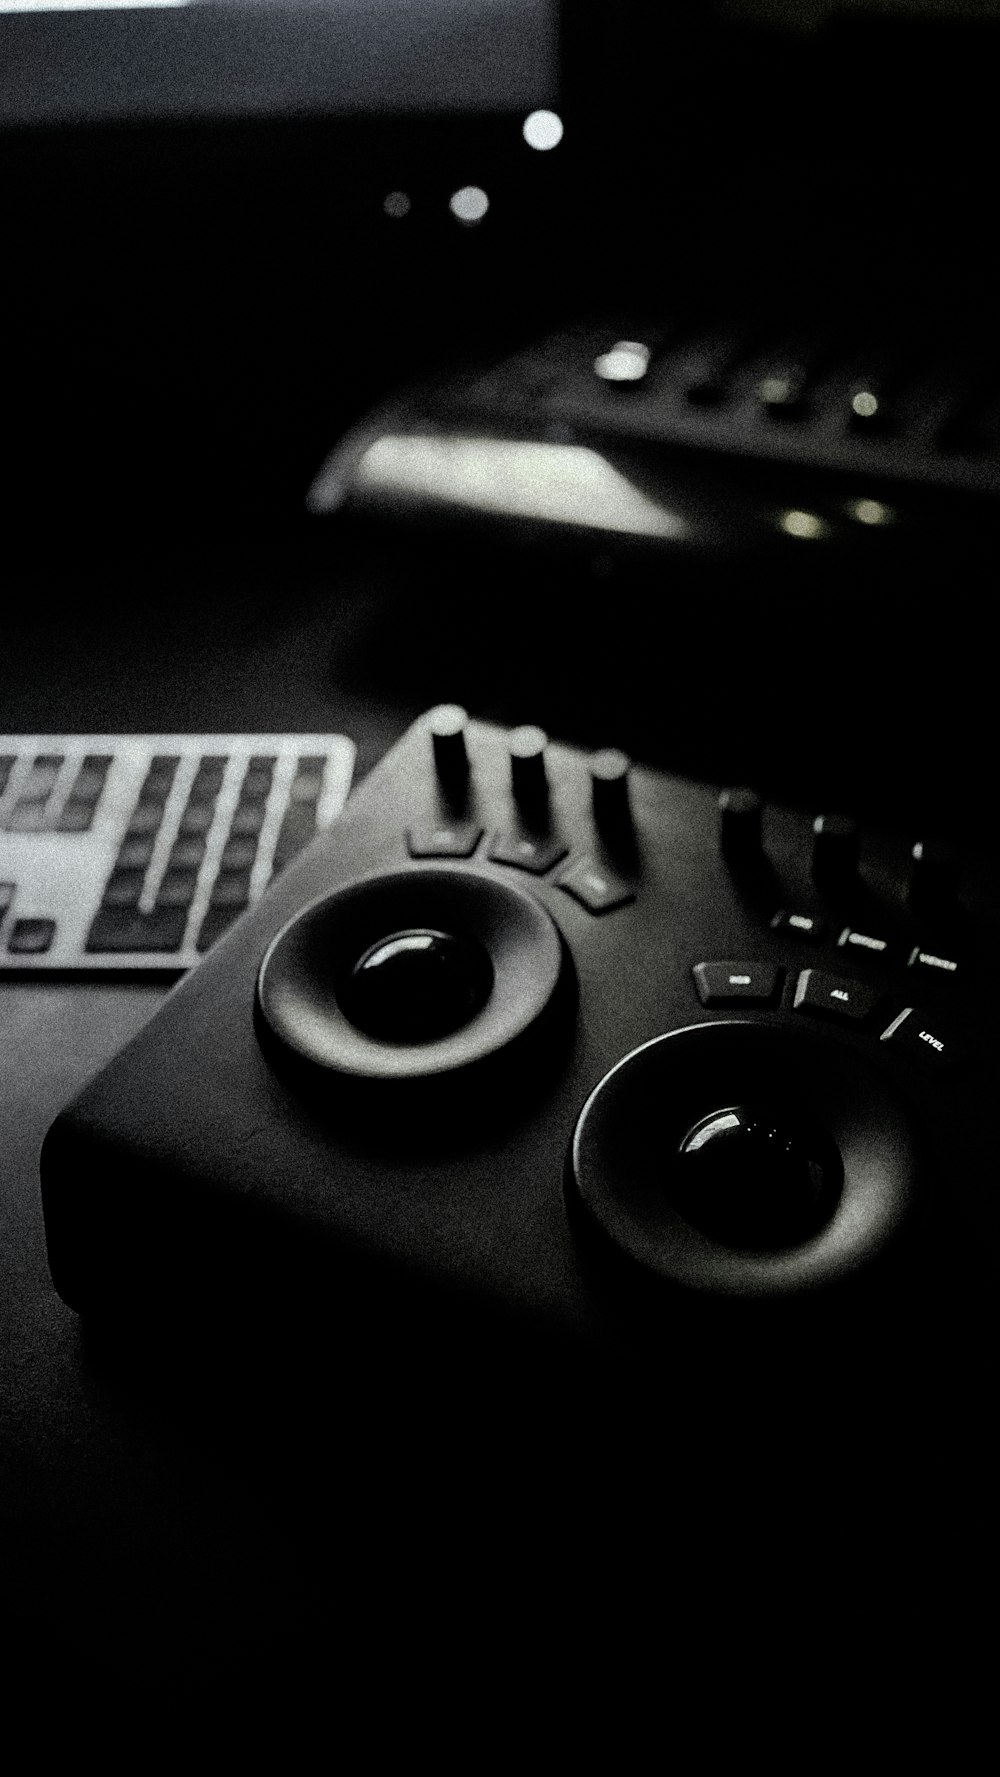 a black and white photo of a remote control